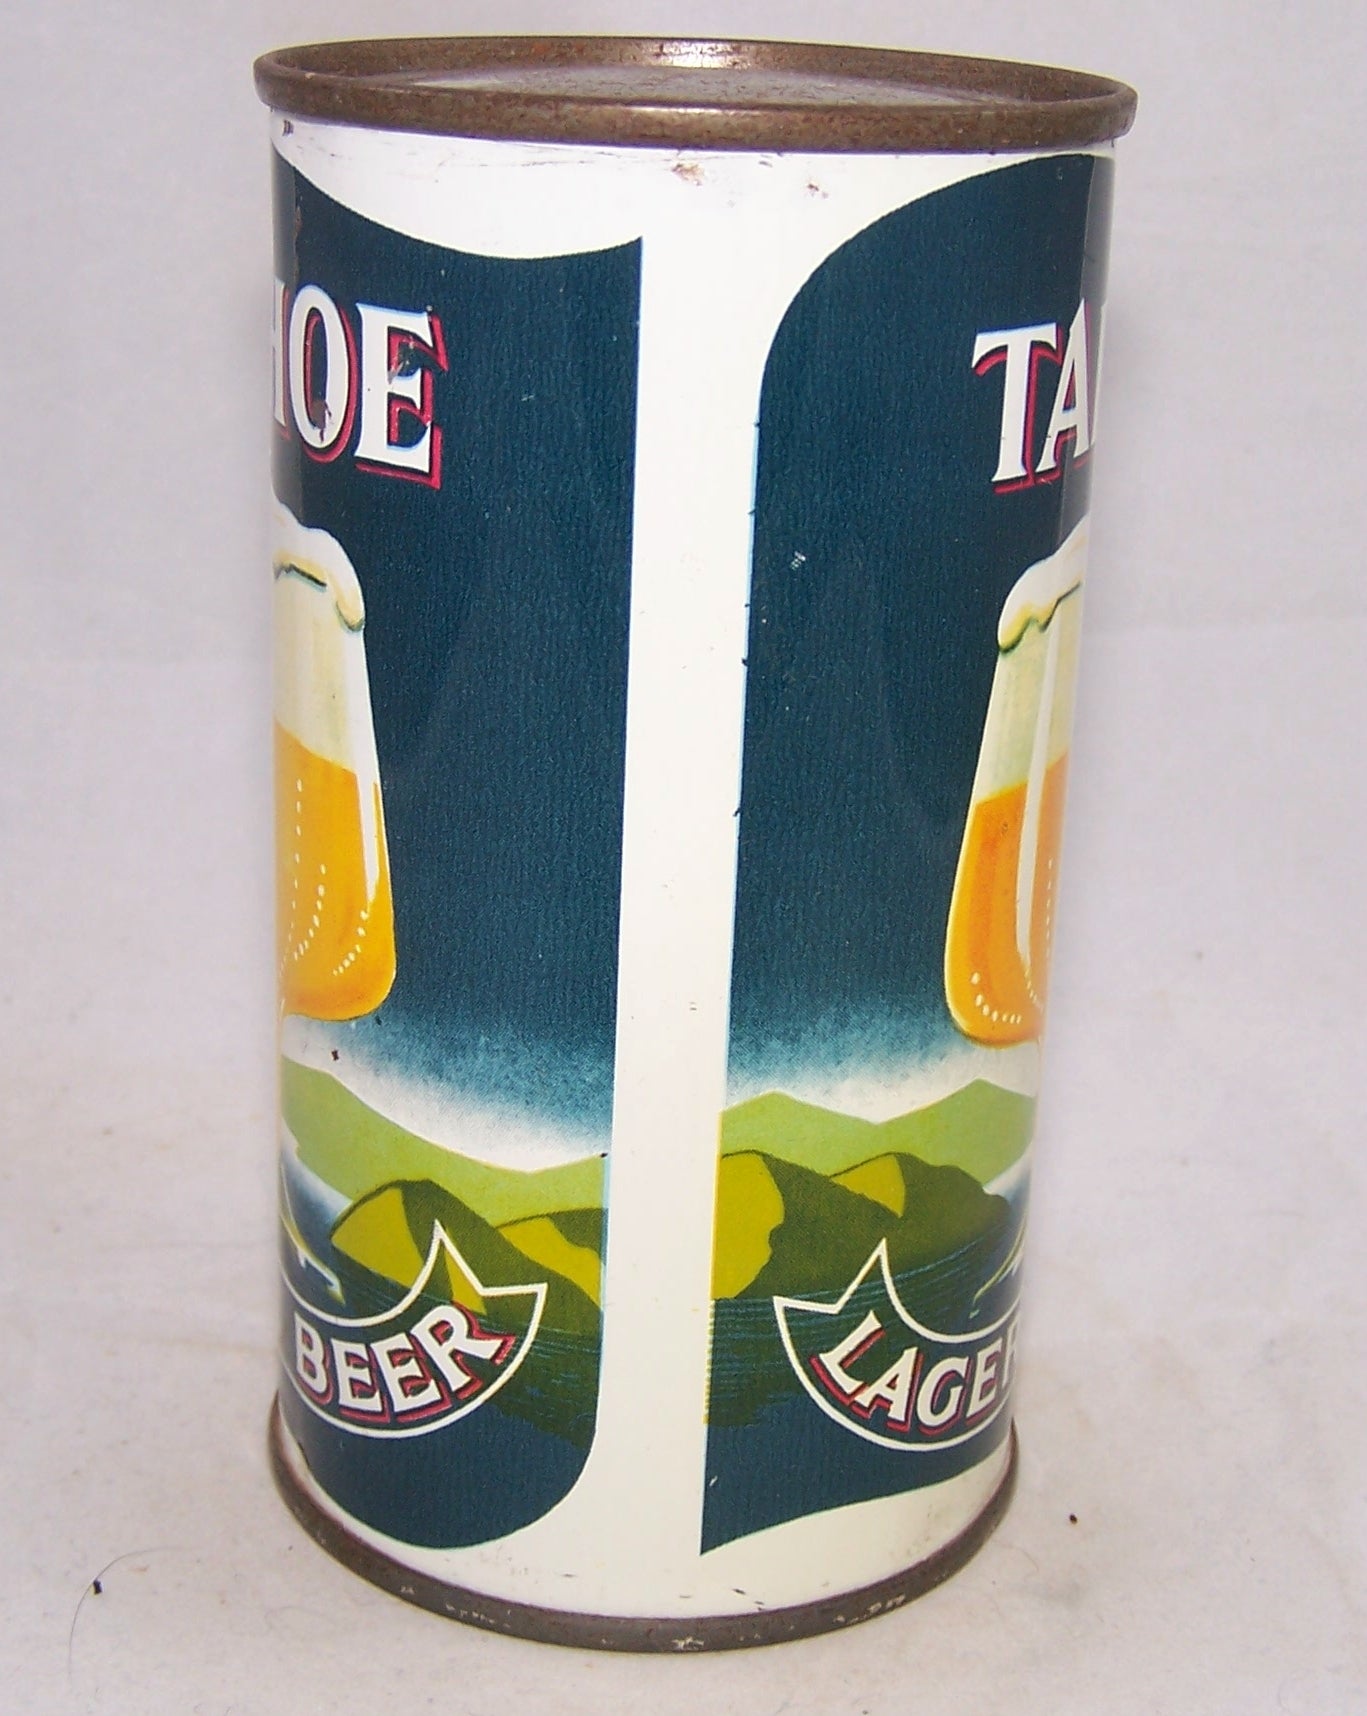 Tahoe Lager Beer, USBC 138-08, Grade 1/1+  Sold on 04/22/18